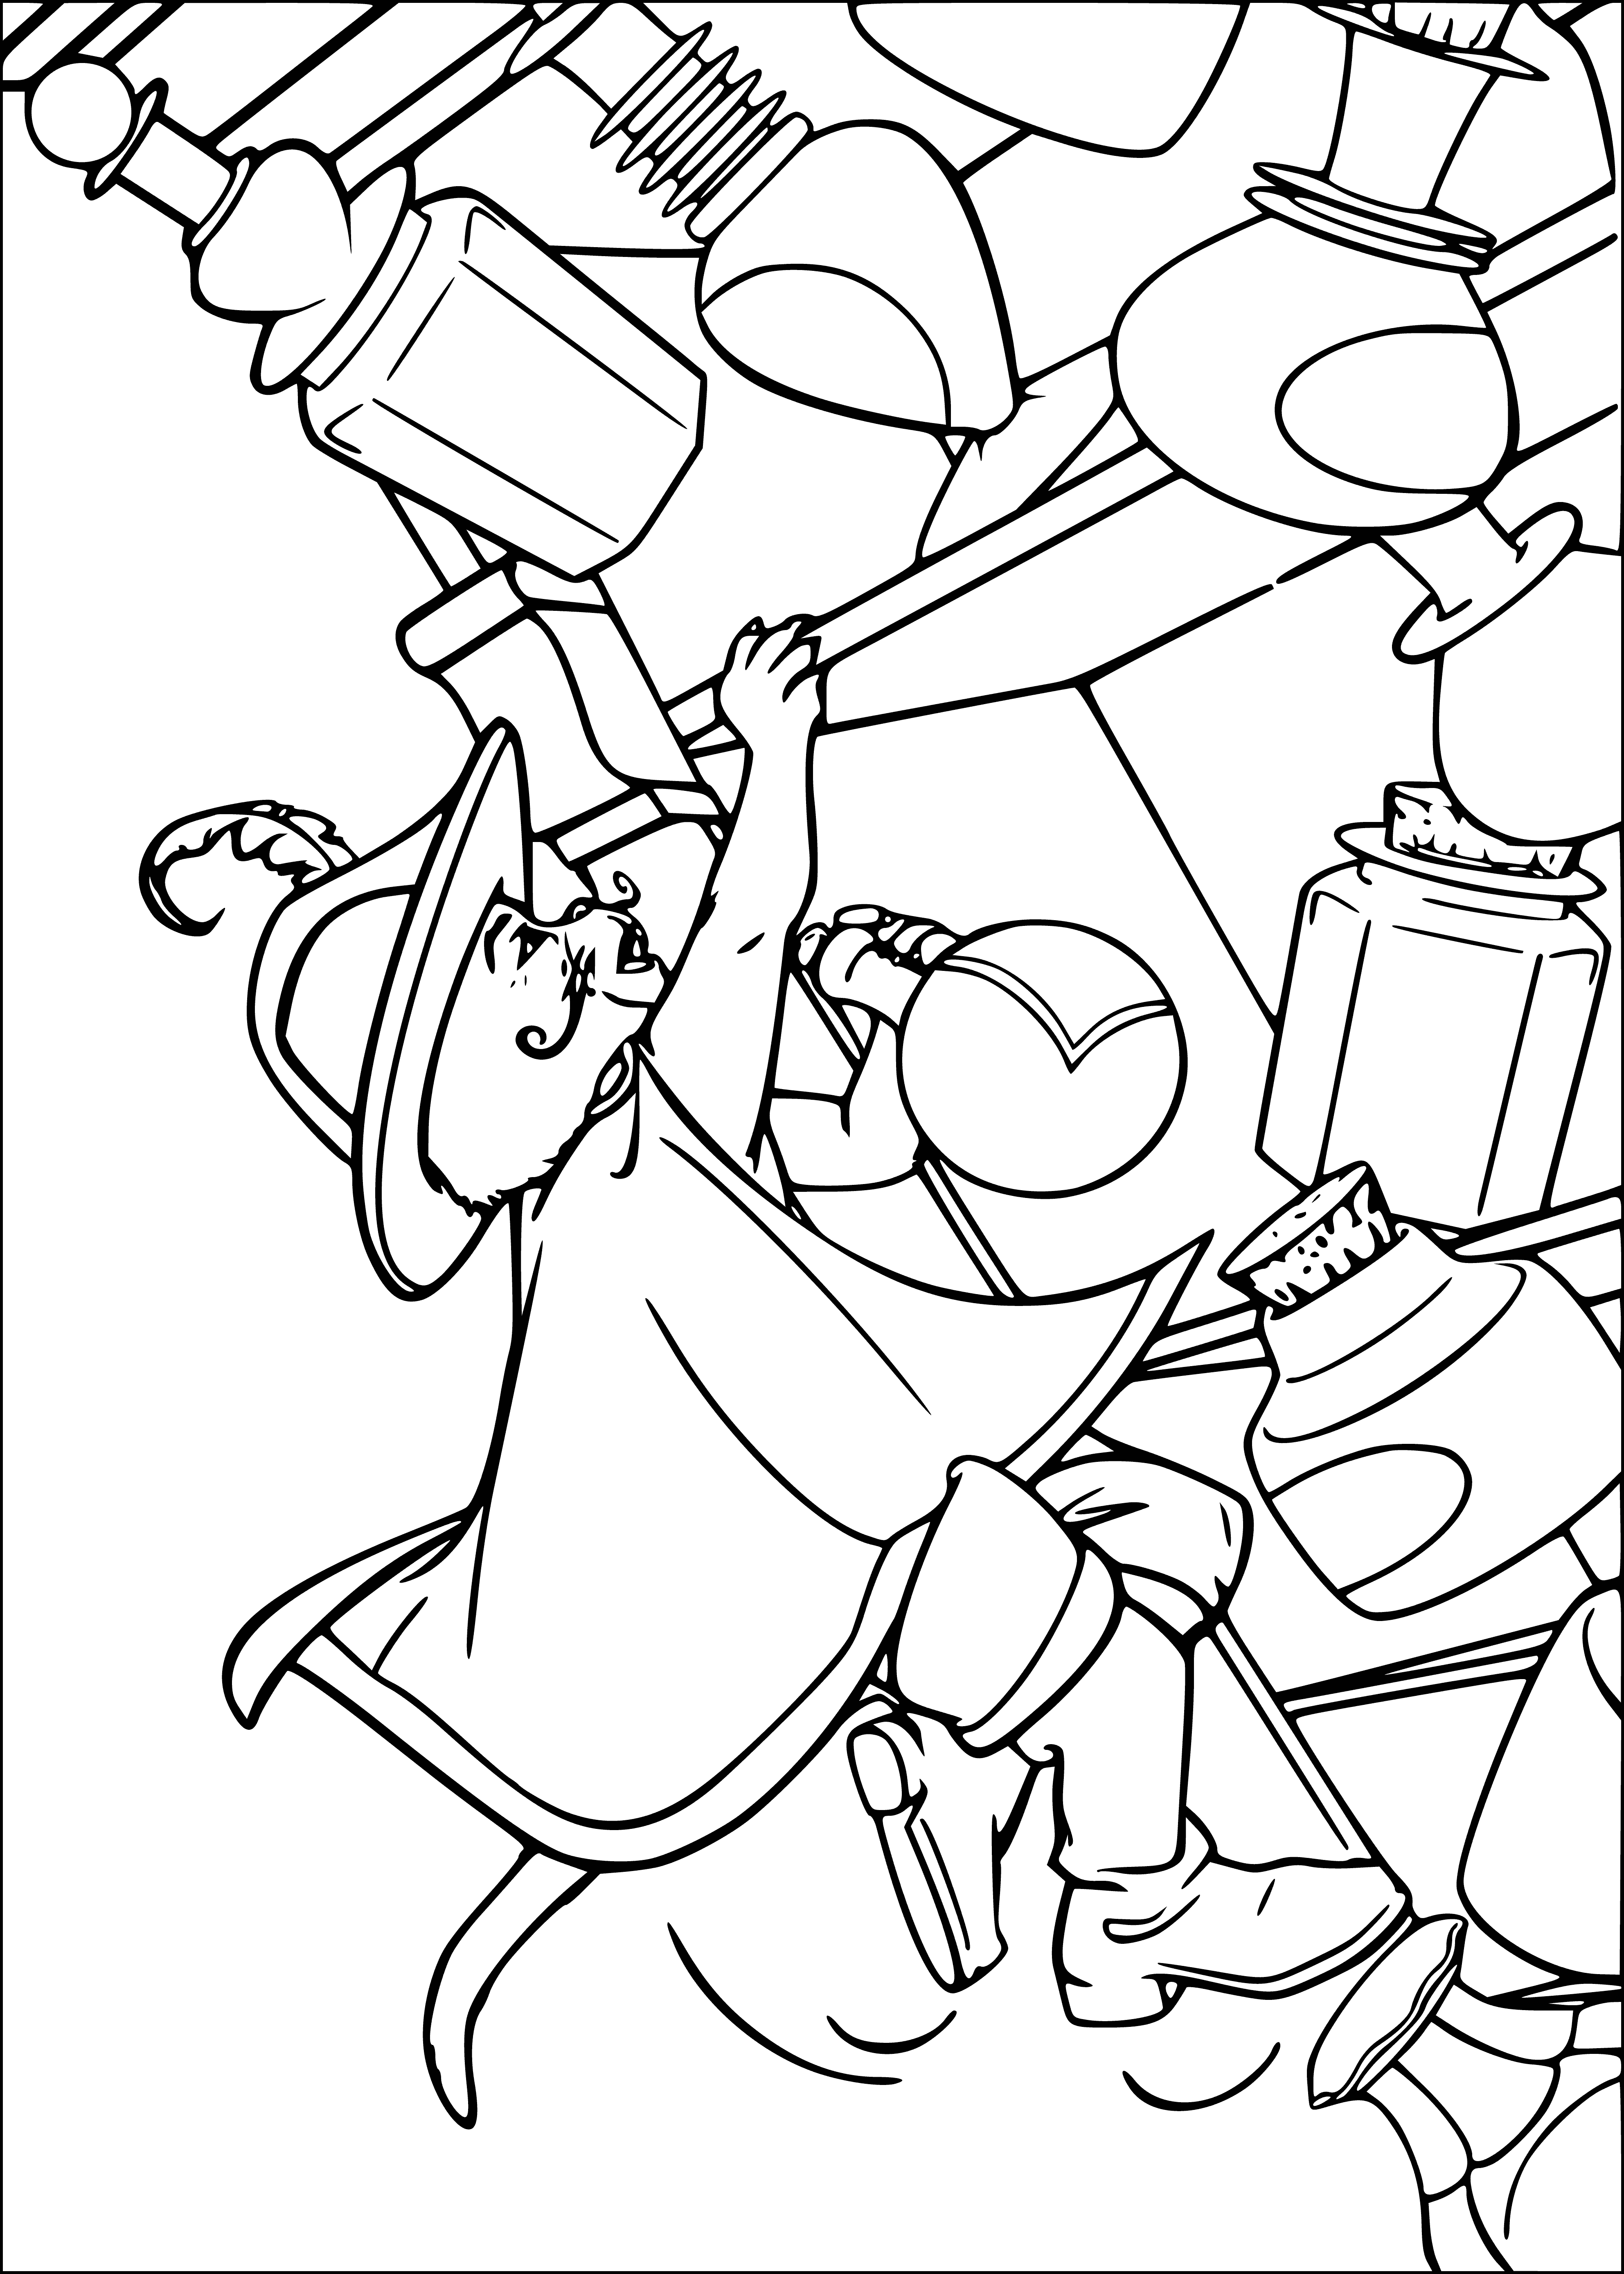 The cat falls off the shelf coloring page